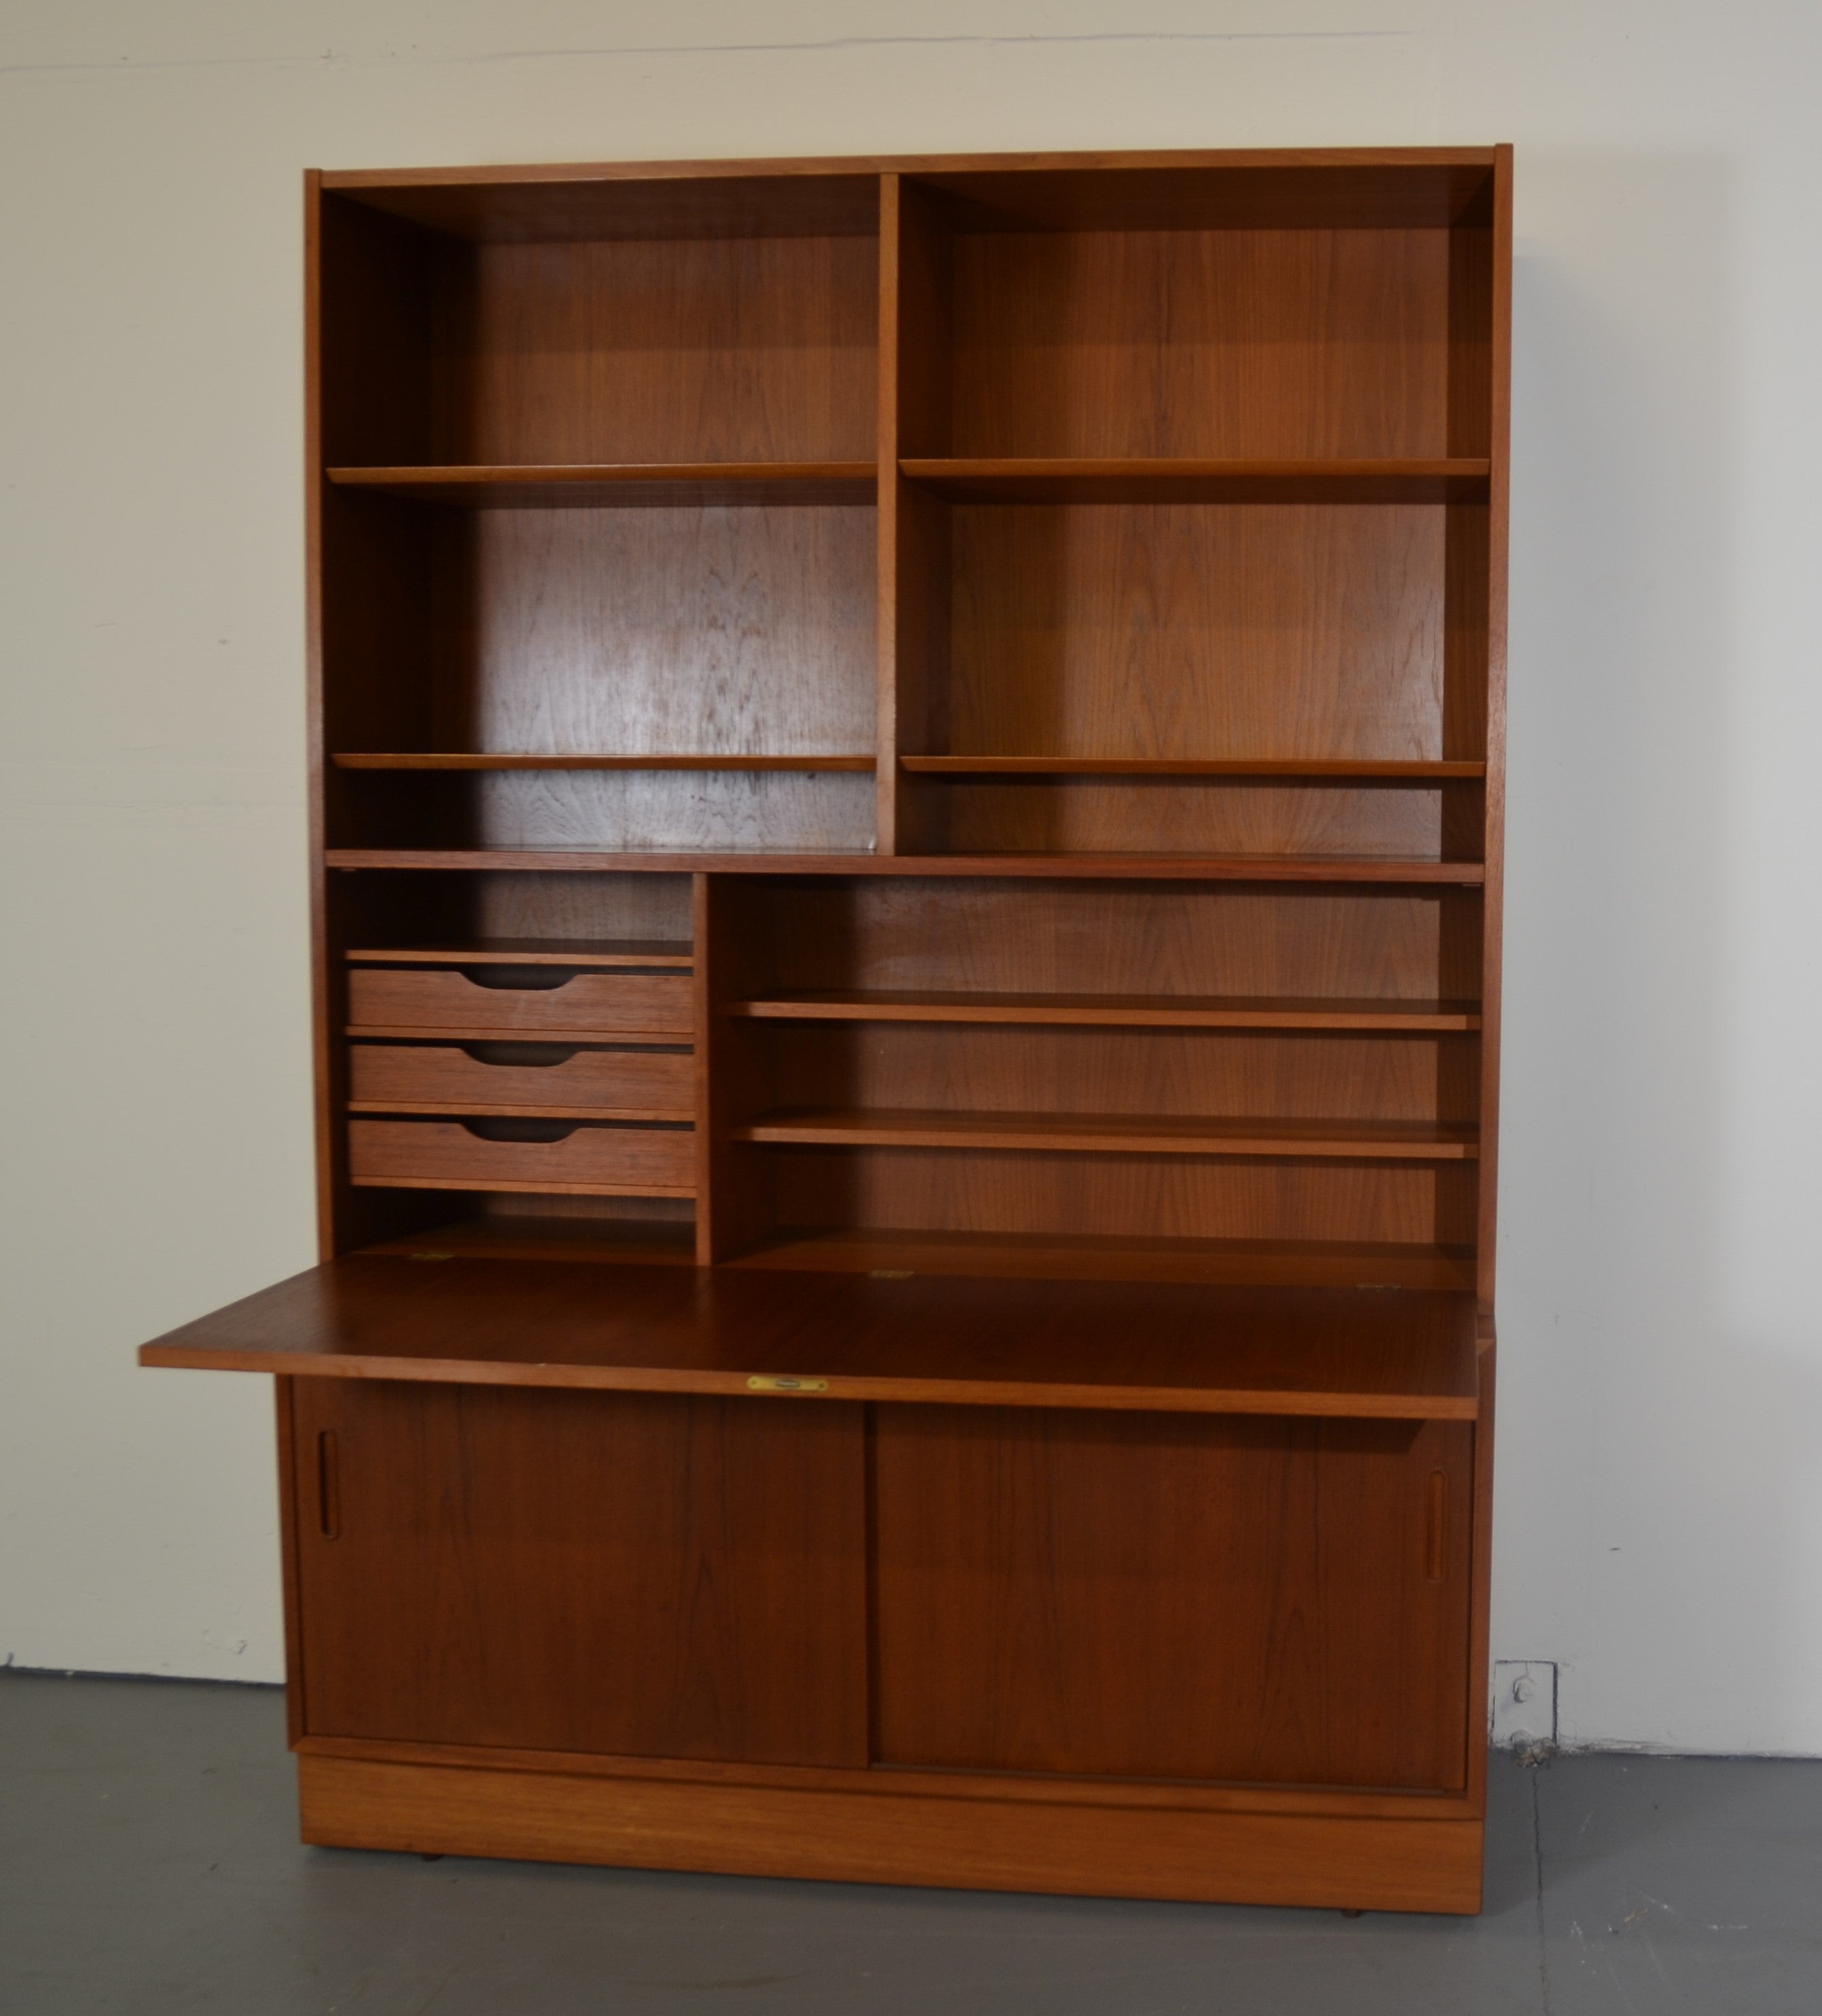 This gorgeous secretary was designed by one of the premier Danish Mid-Century designers, Poul Hundevad. As many of the mid-century designers were, Hundevad was inspired by the past for this piece with its drop front desk with bookcase above and